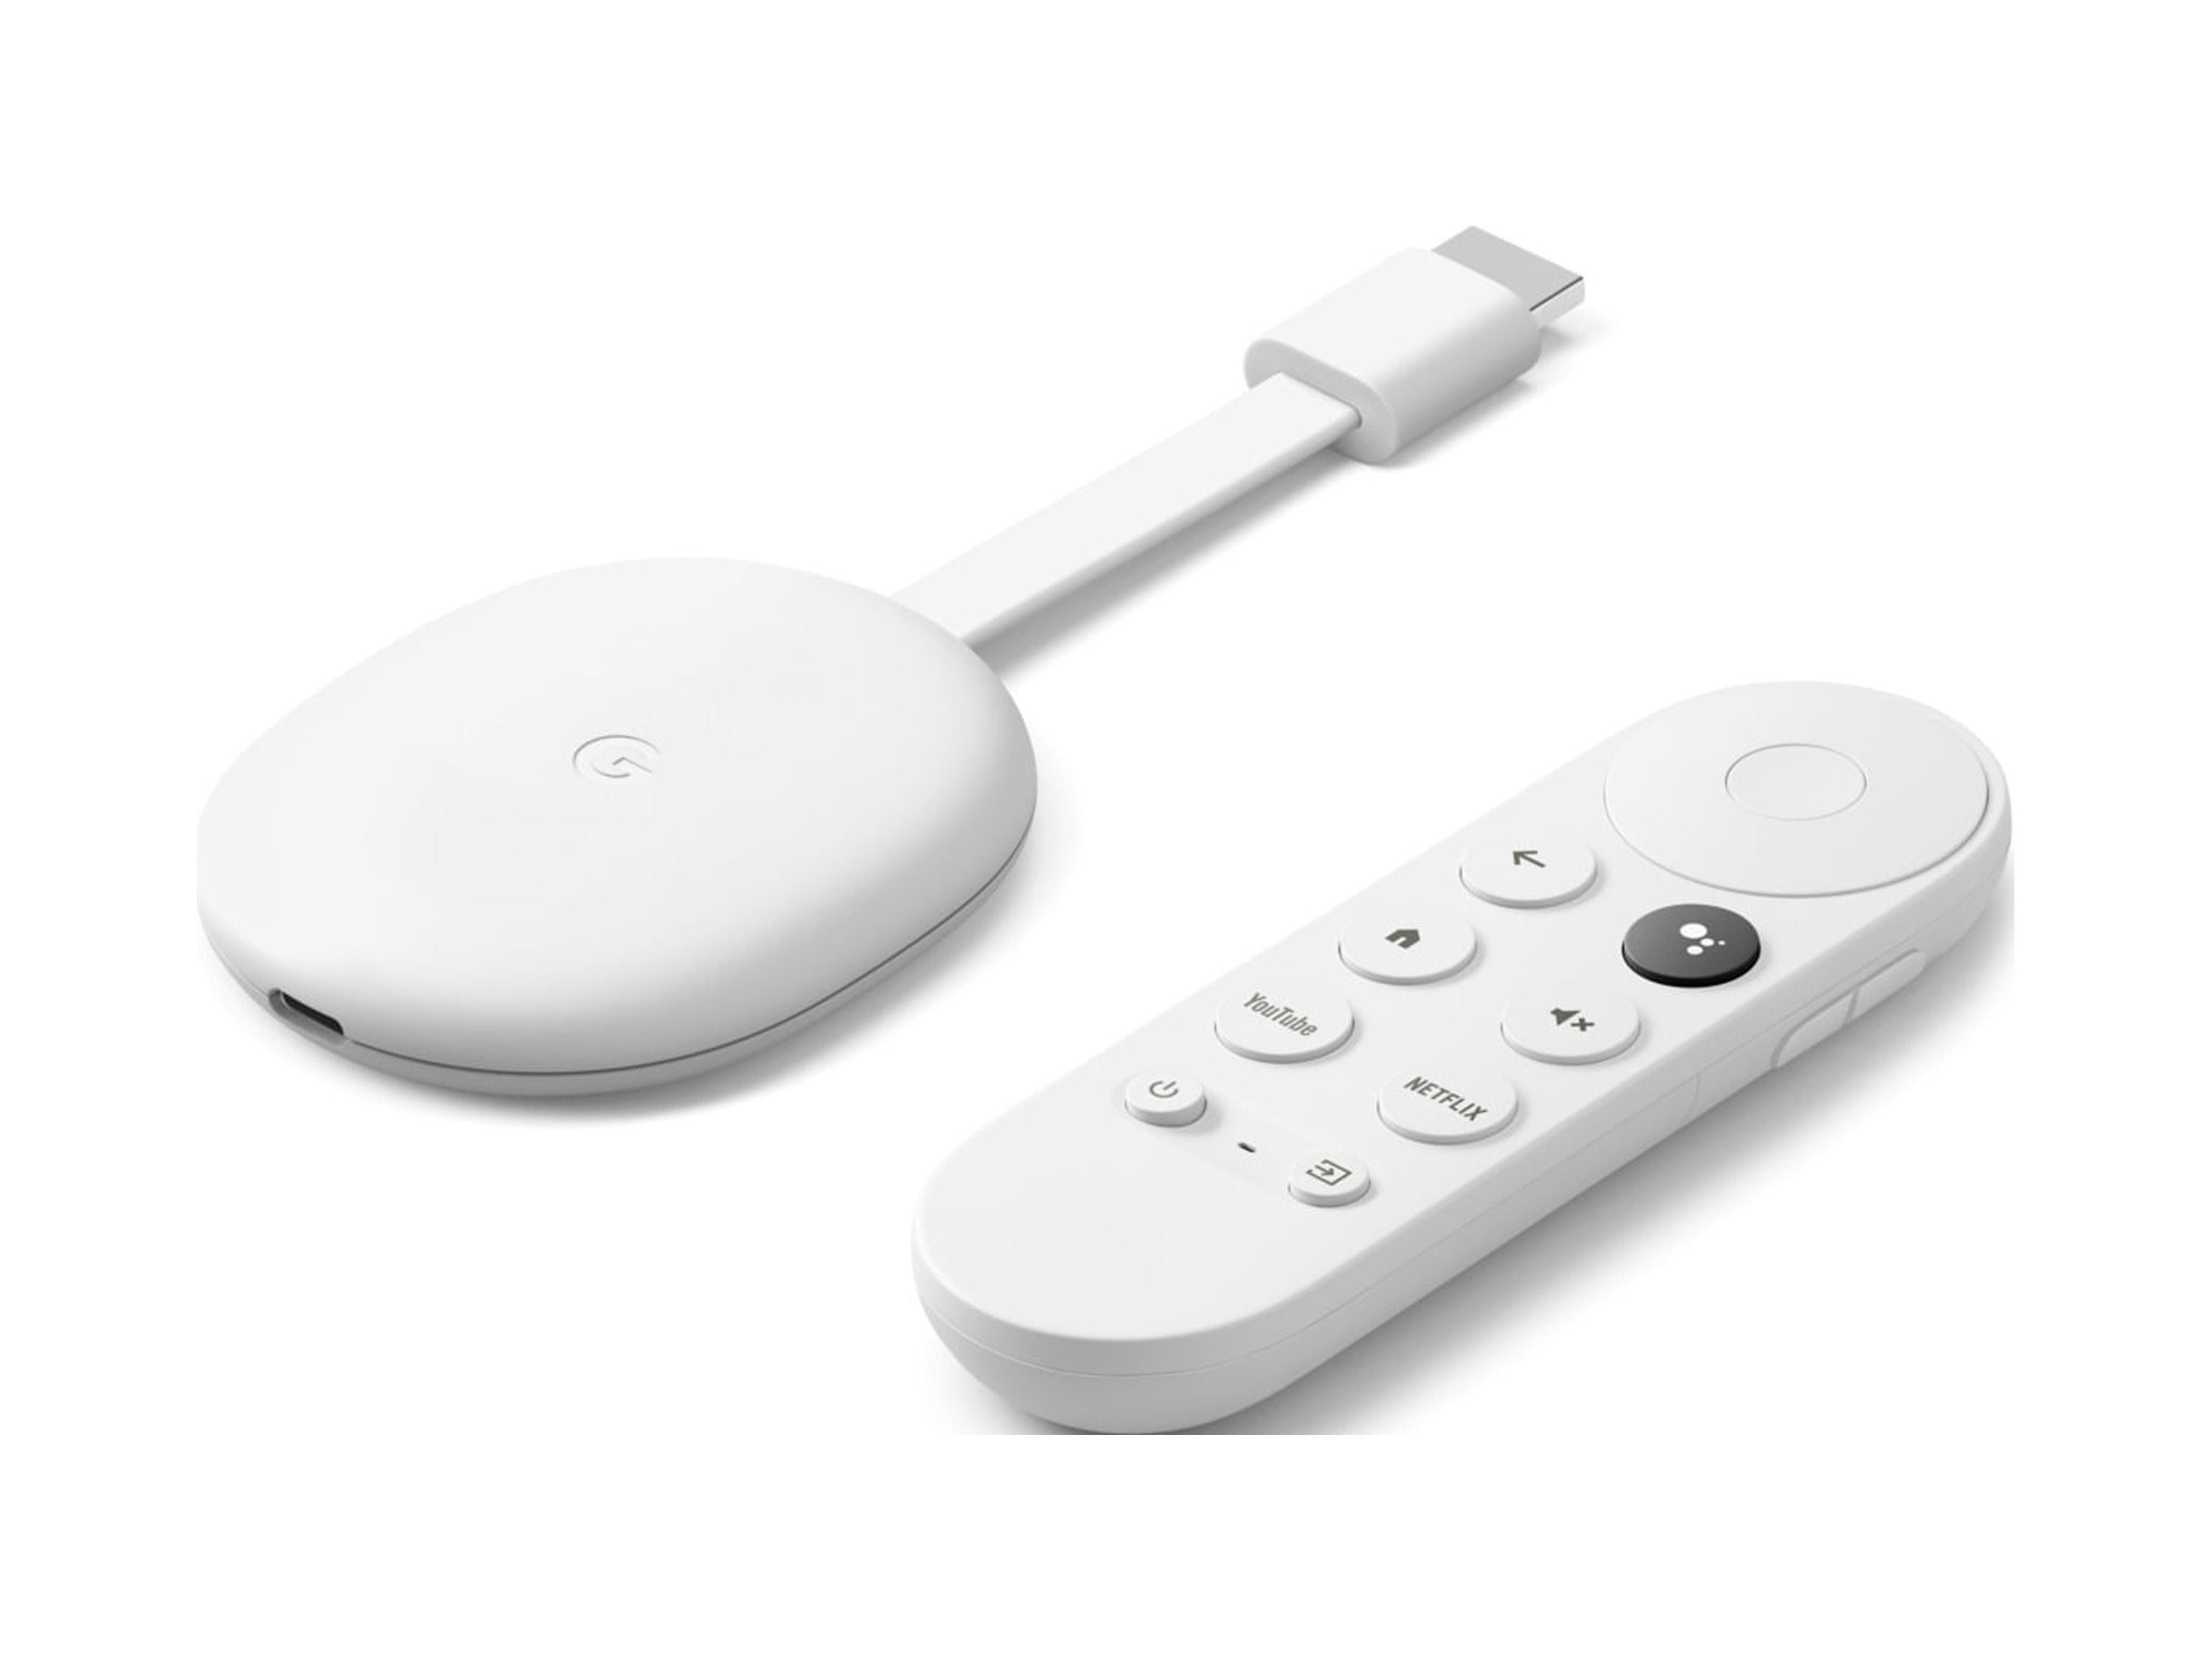 Chromecast with Google TV (HD) - Streaming Device